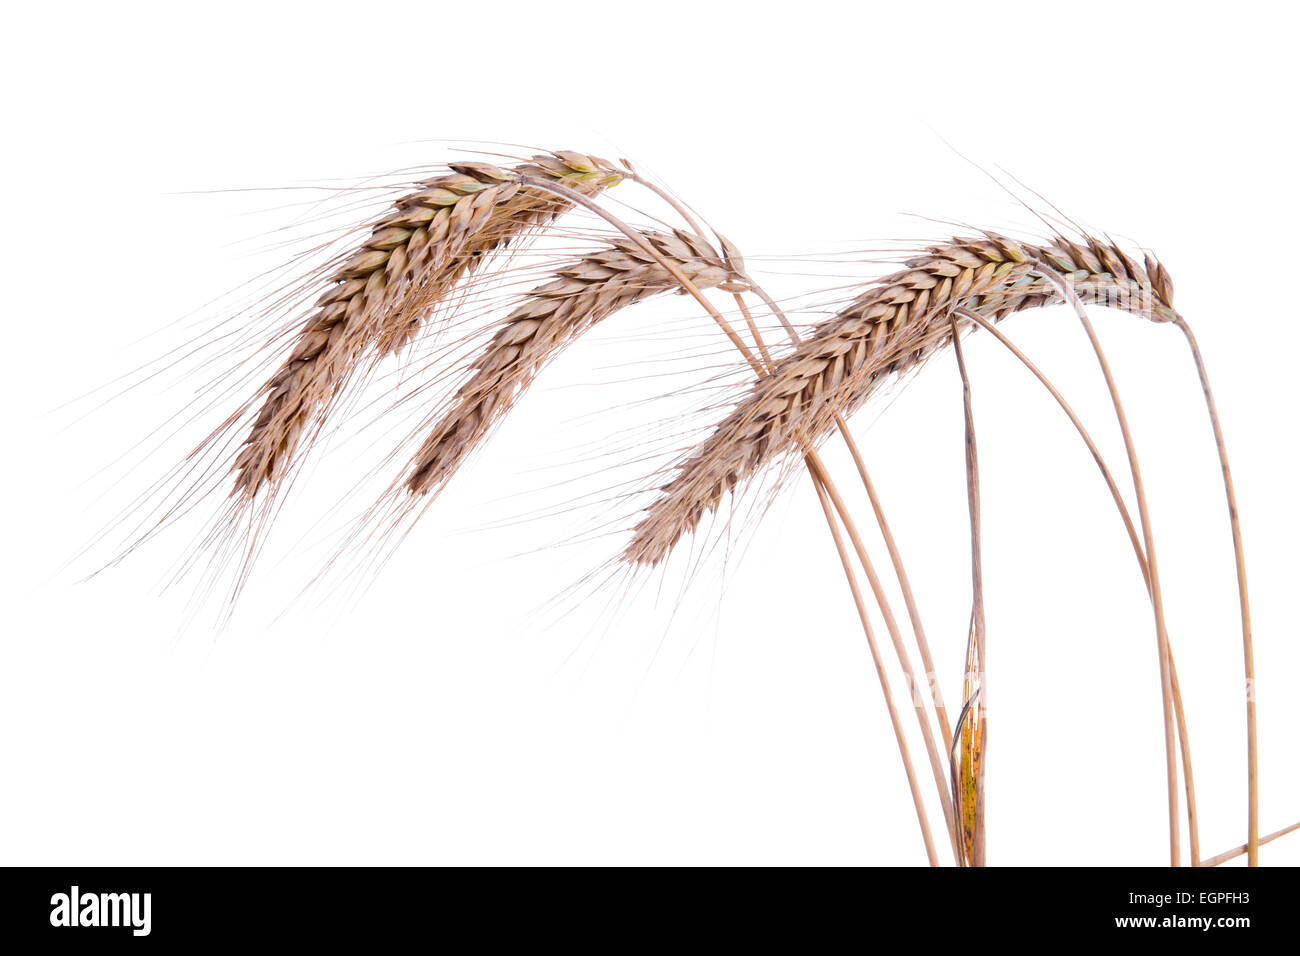 Ripe ears of wheat on a white background Stock Photo